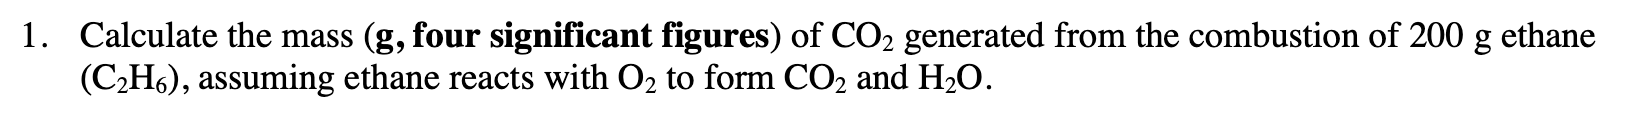 1. Calculate the mass (g, four significant figures) of CO2 generated from the combustion of 200 g ethane
(C2H6), assuming ethane reacts with O2 to form CO2 and H2O.
